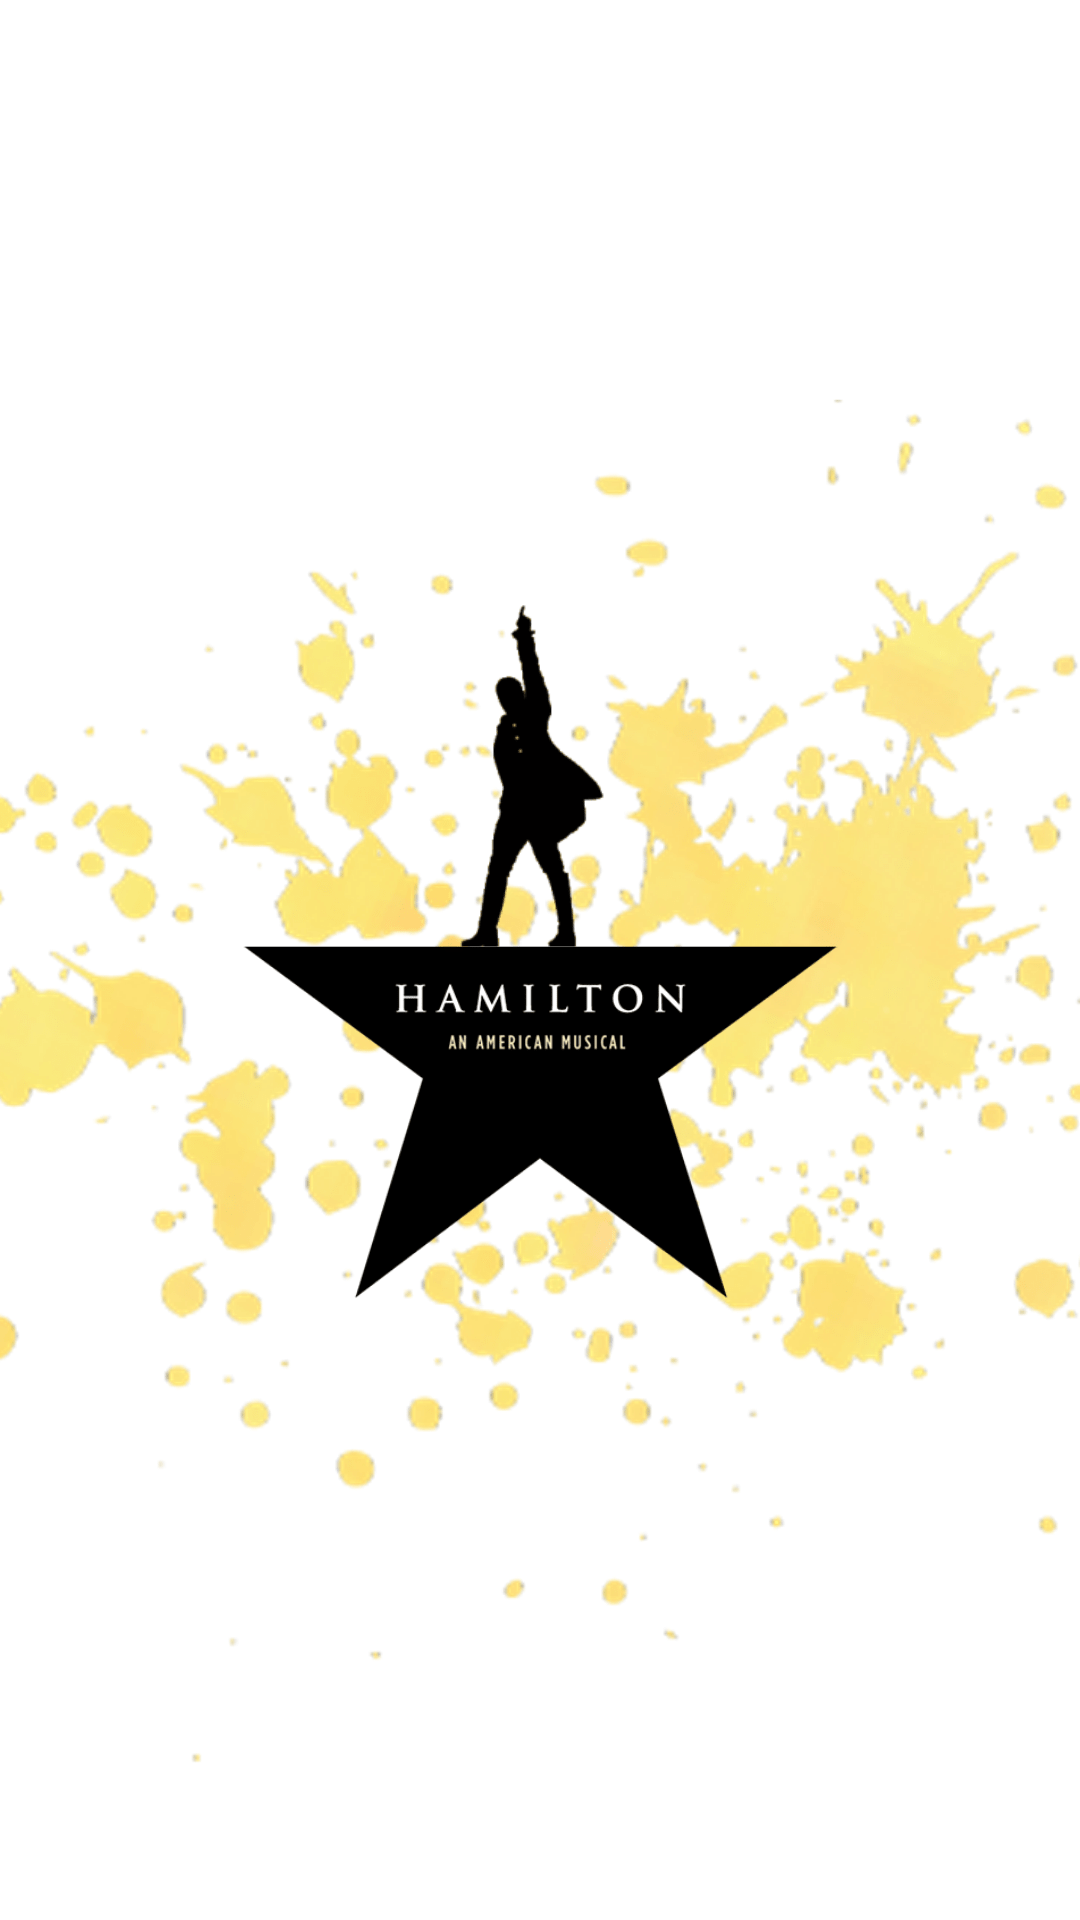 Hamilton Wallpaper pt.1 (I will give credit when the series is over) I DID NOT CREATE THESE, THEY WERE OFF OF PINTEREST AND GOOGLE